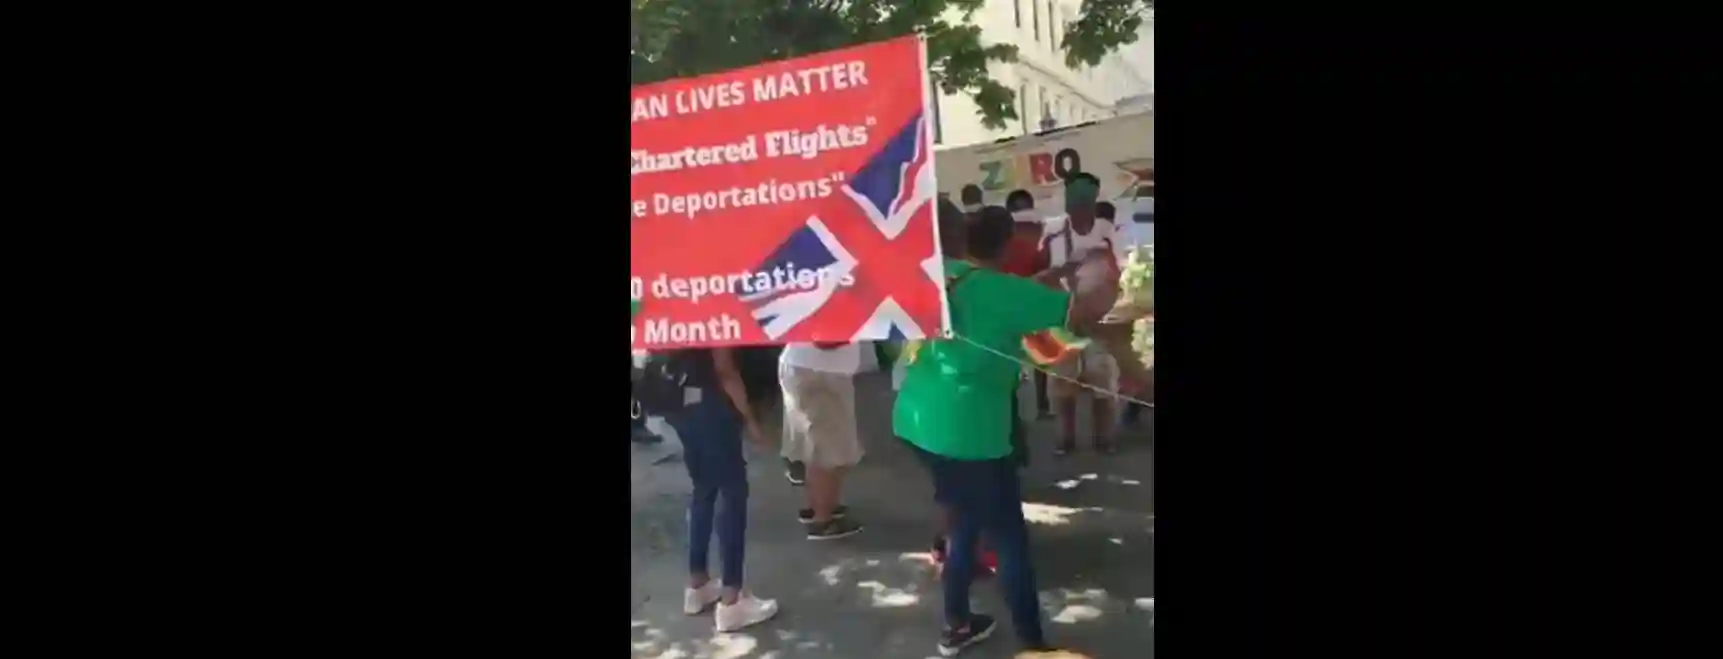 WATCH: Zimbabweans Demonstrate Against Deportation From UK